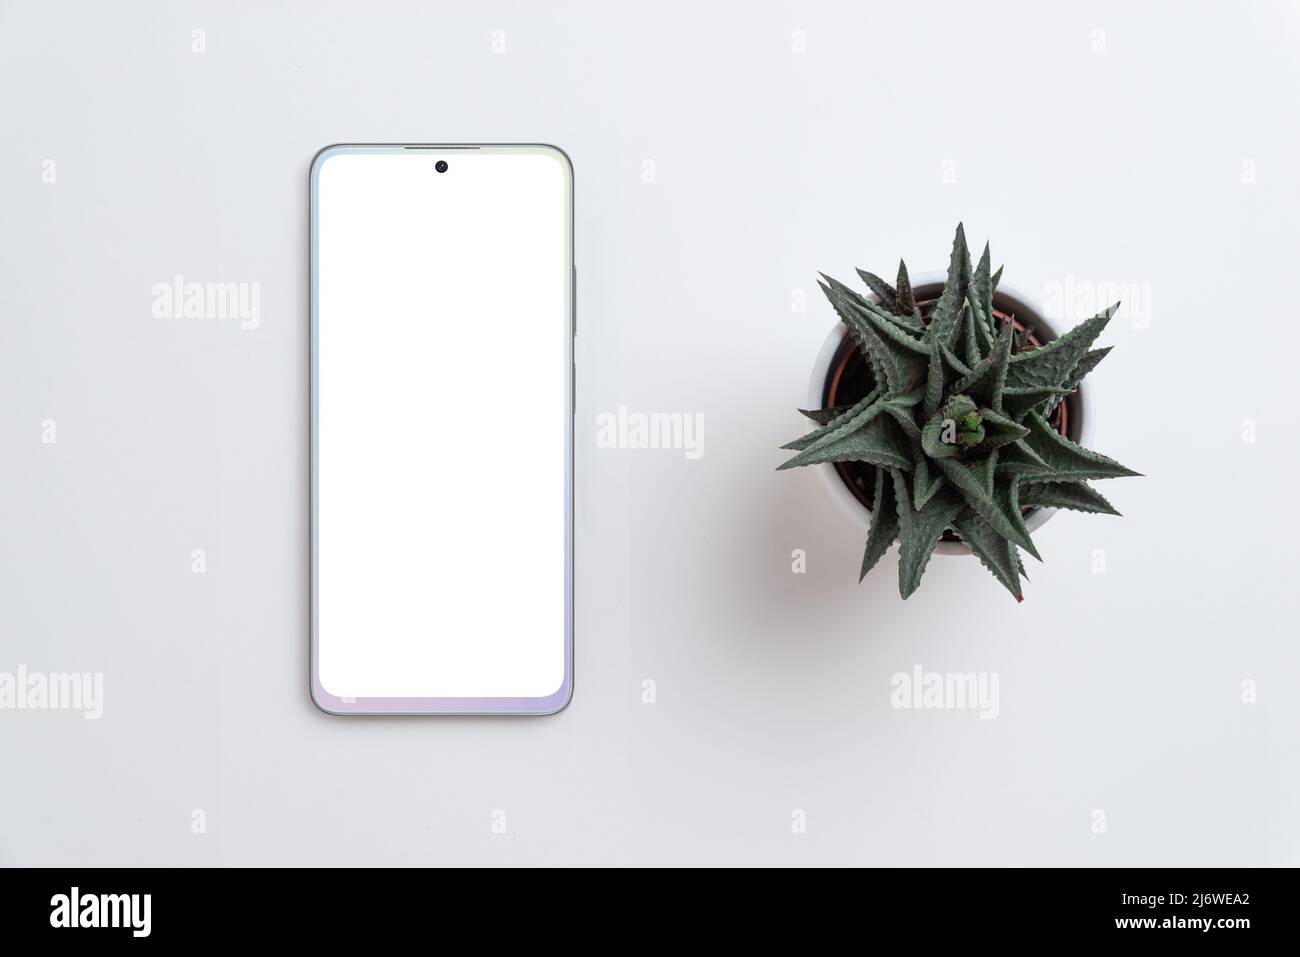 Phone and plant on gray surface. Isolated screen for app design promotion mockup. Top view, flat lay Stock Photo